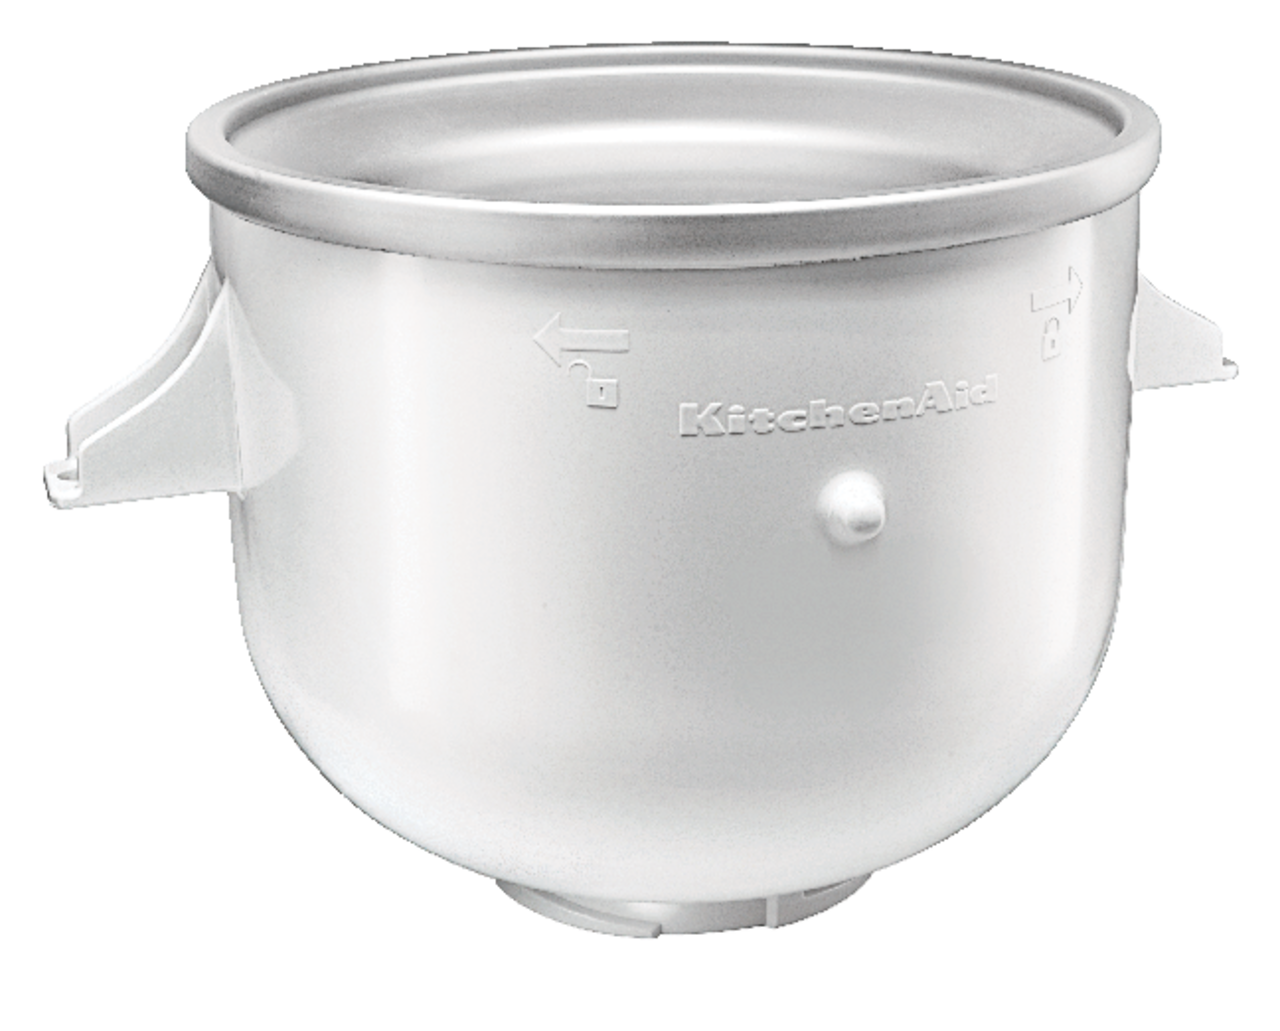 https://media-www.canadiantire.ca/product/living/kitchen/kitchen-appliances/0431437/kitchen-aid-ice-cream-maker-5b3770c7-2fe0-40ff-9503-e0ff7b70988f.png?imdensity=1&imwidth=1244&impolicy=mZoom